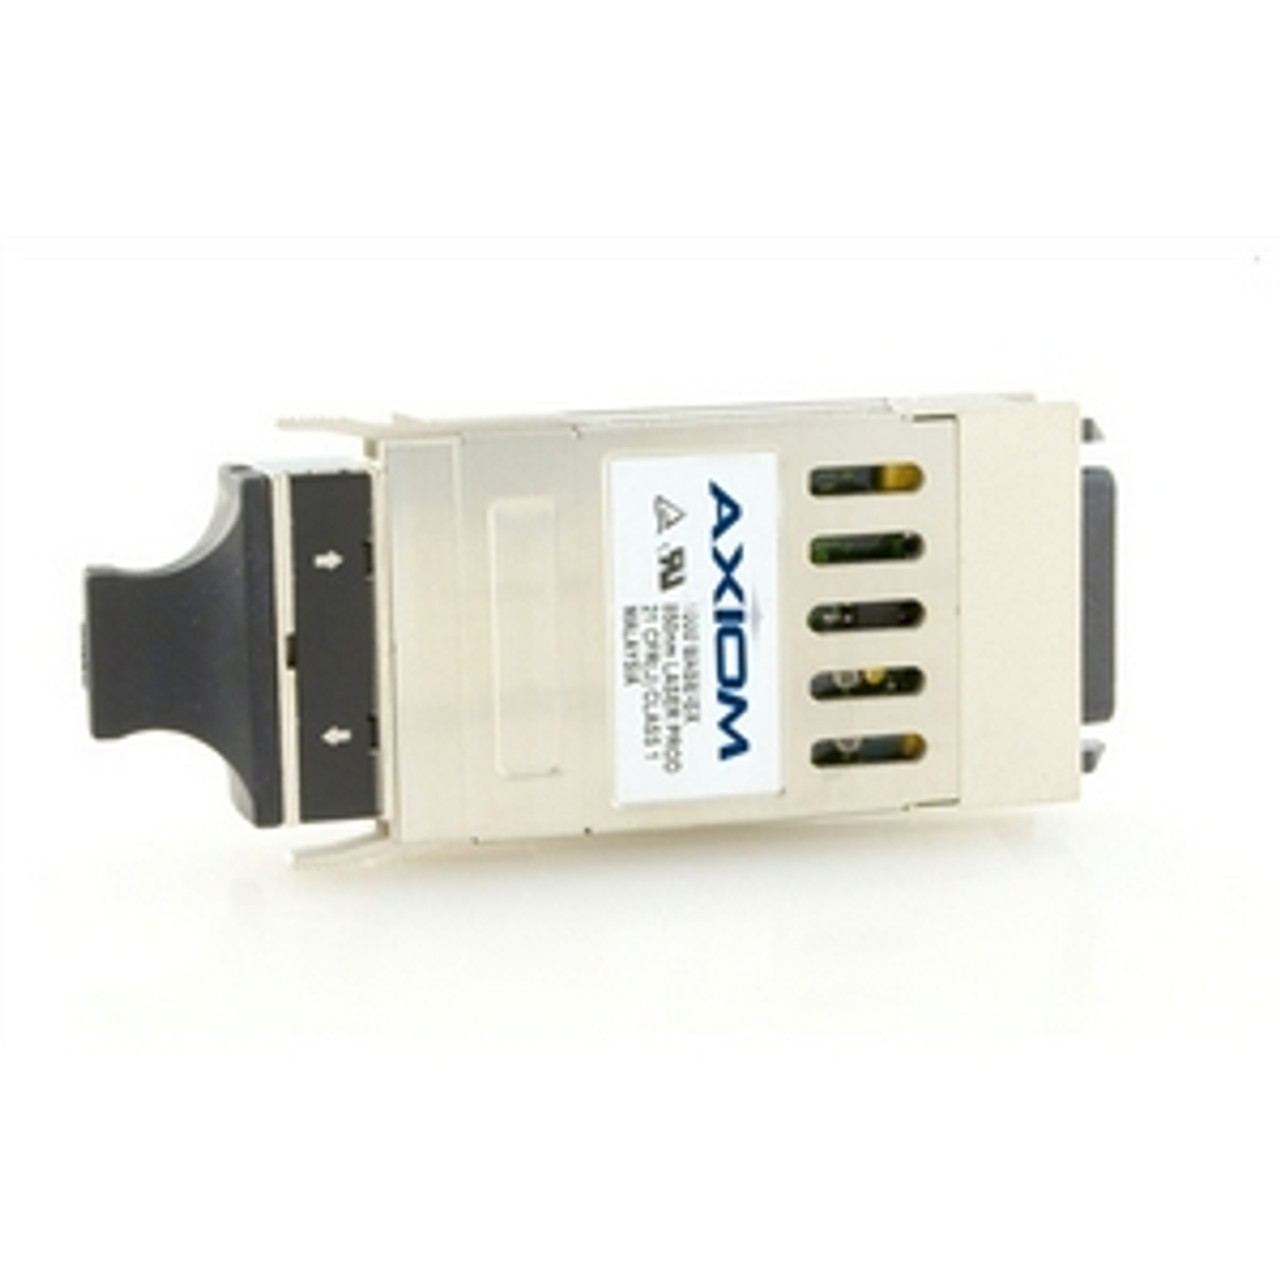 700013147-AX Axiom 1.25Gbps 1000Base-ZX Single-mode Fiber 80km 1550nm Duplex SC Connector GBIC Transceiver Module for Avaya Compatible